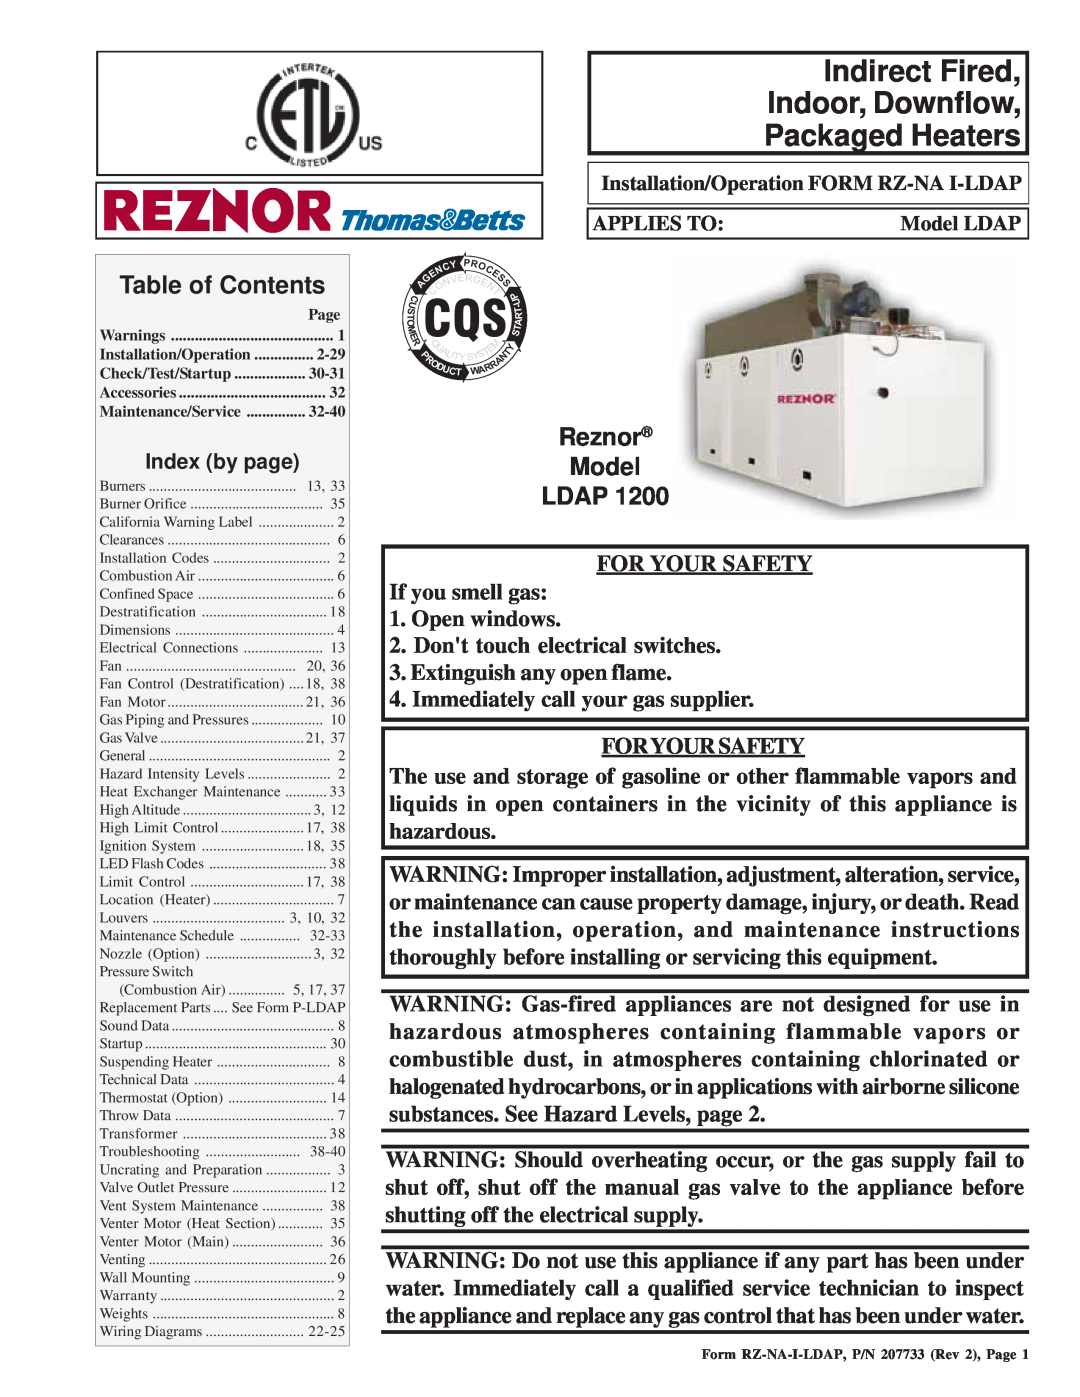 Thomas & Betts LDAP 1200 warranty Table of Contents, Reznor Model LDAP, Rcqsq, Dont touch electrical switches, Page, 2-29 